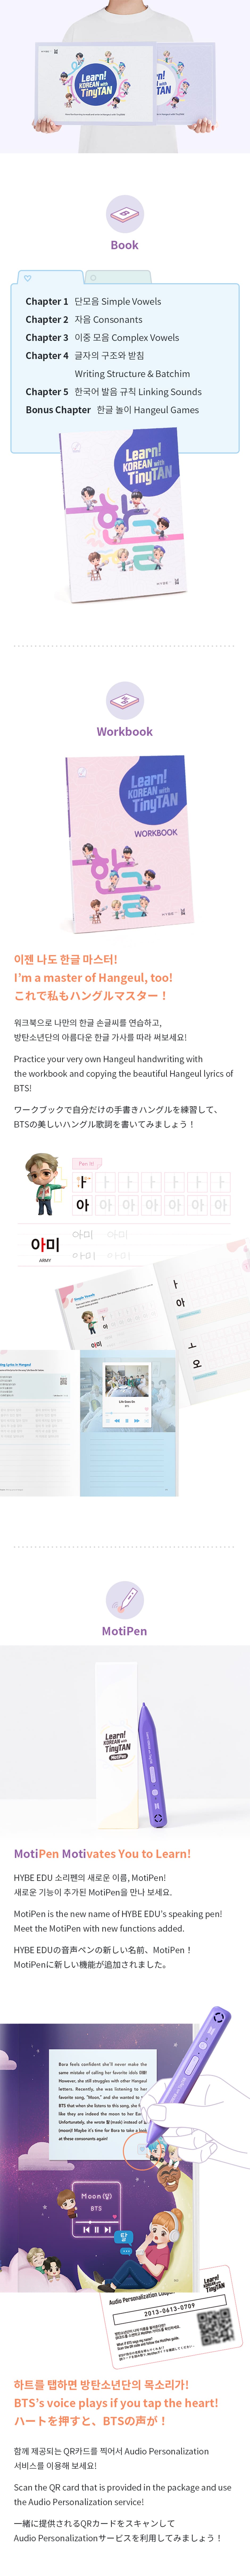 LEARN! KOREAN WITH TINYTNA BOOK PACKAGE